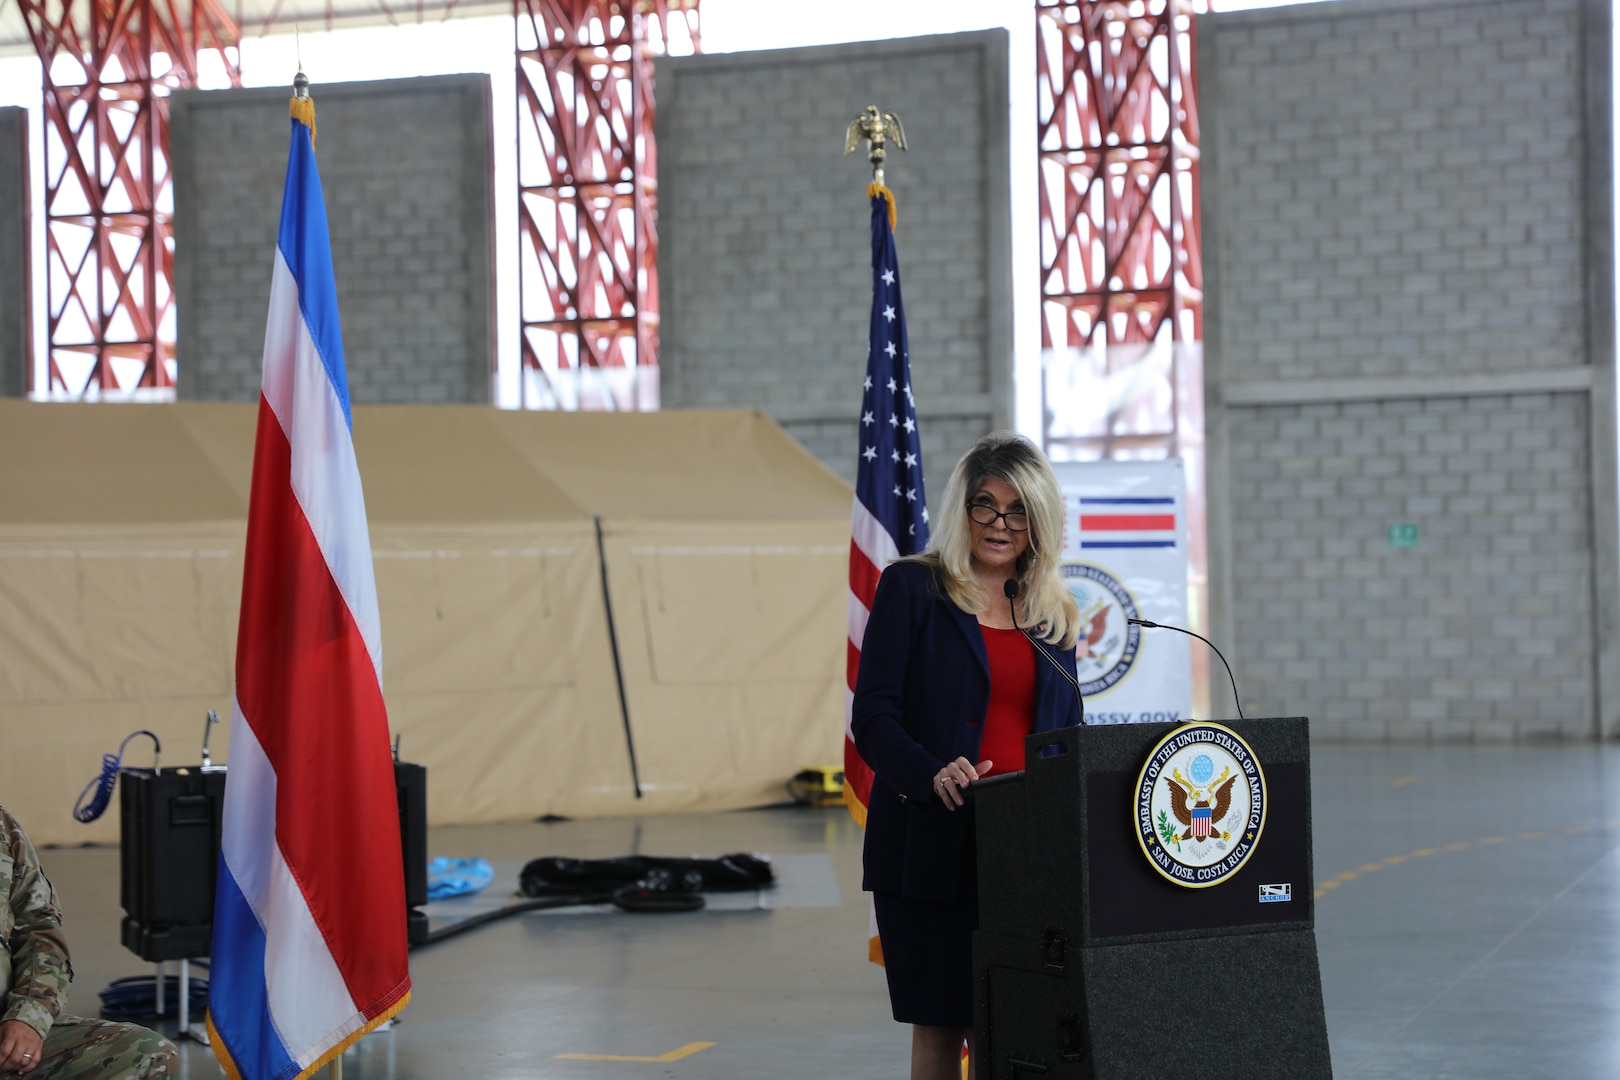 U.S. Ambassador to Costa Rica Sharon Day delivered three field hospitals, purchased by U.S. Southern Command (SOUTHCOM), to the Costa Rican government during an official donation ceremony.